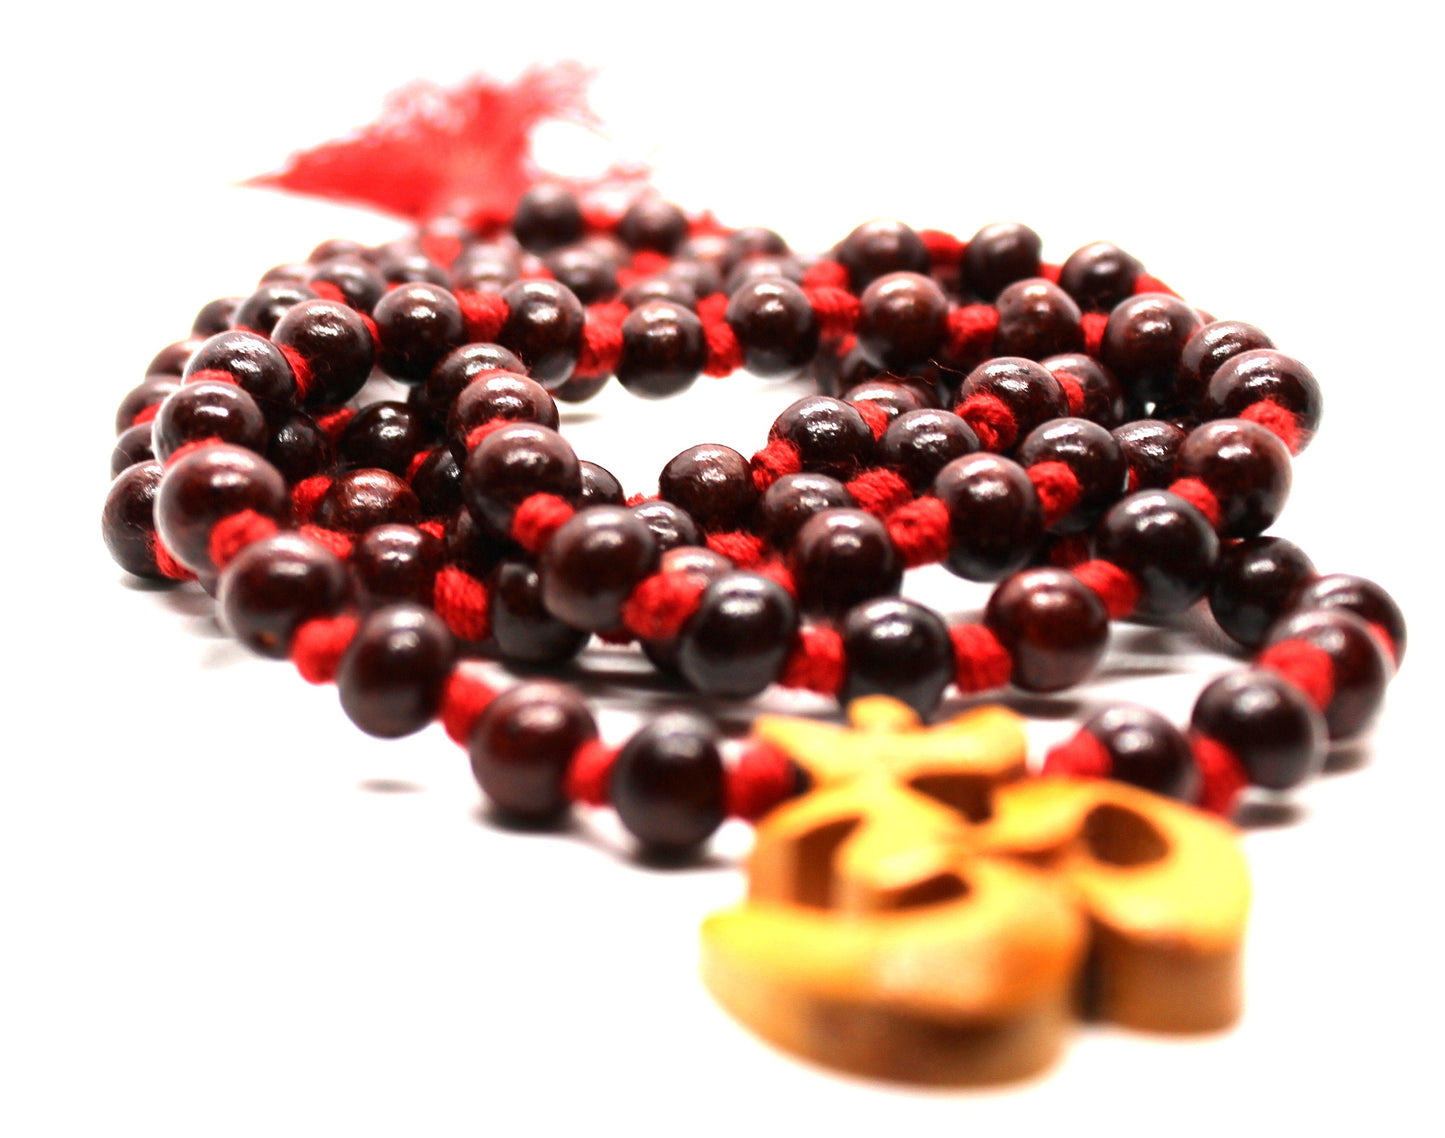 Rosewood Knotted Mala 108+1 Beads with wooden OM charm - Handmade knotted rosewood Mala necklace- yoga meditation beads - 8MM Rosewood Mala